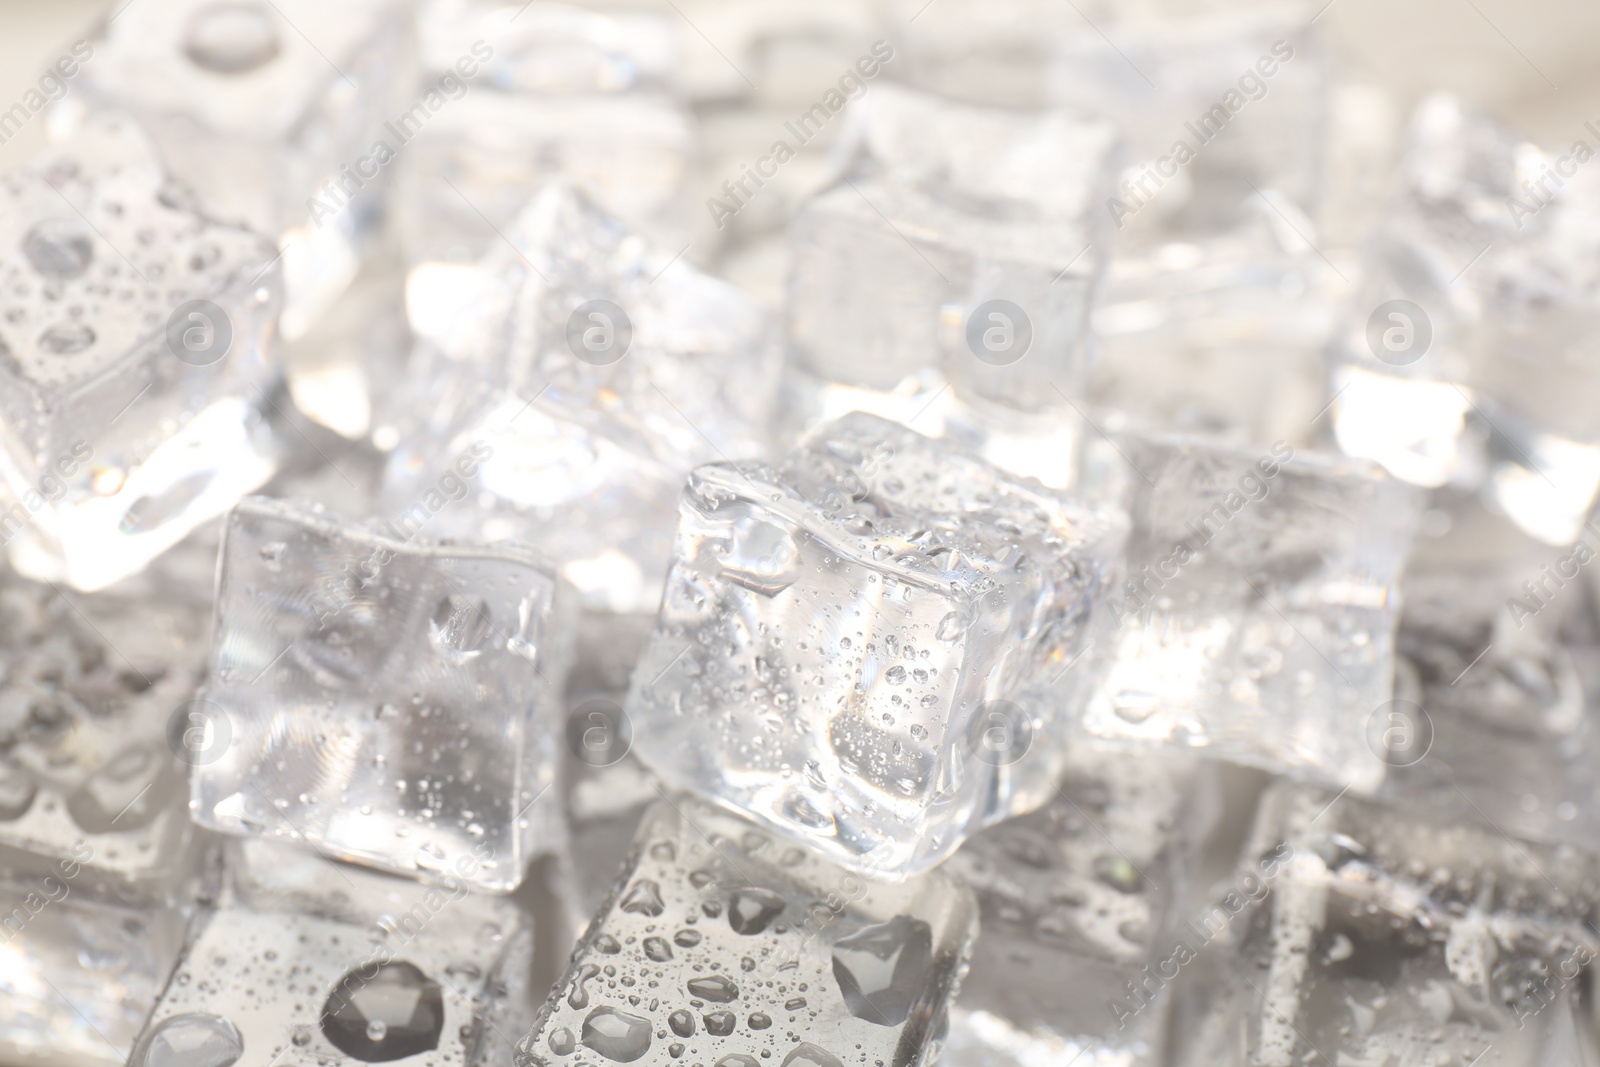 Photo of Melting ice cubes with water drops as background, closeup